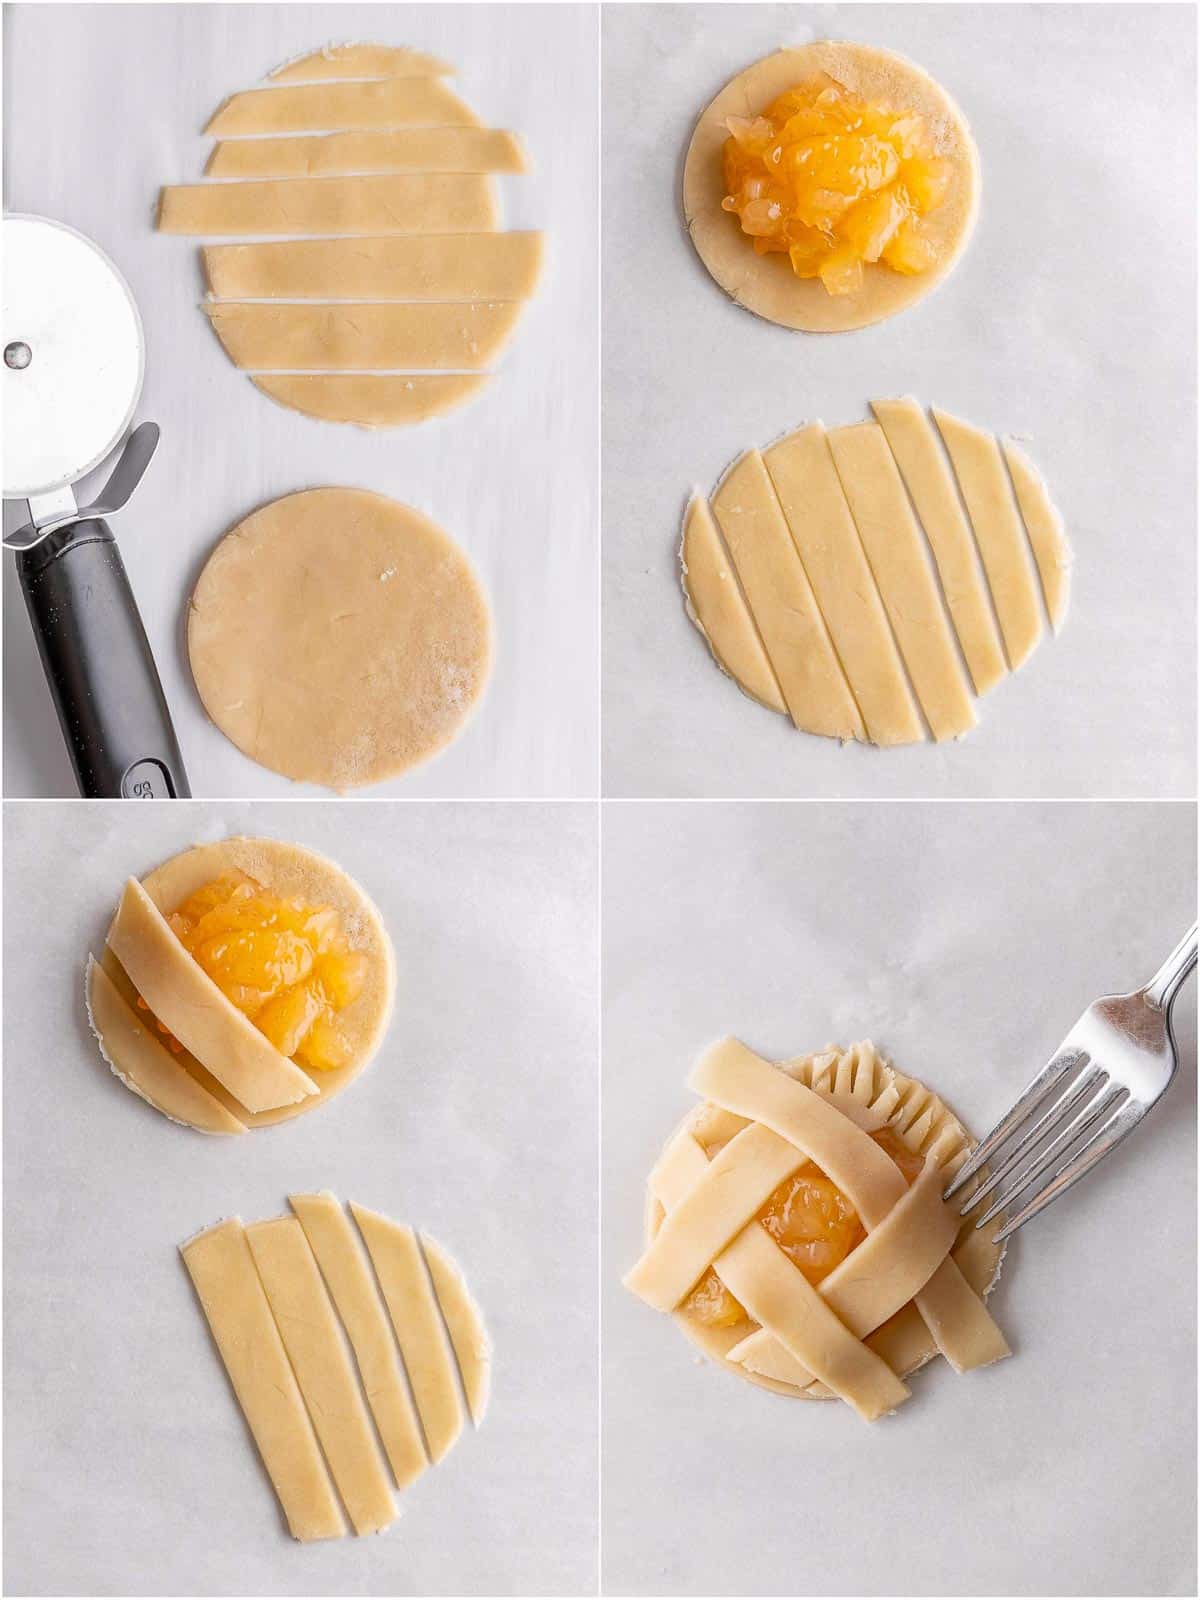 process shots showing how to assemble the pie before baking